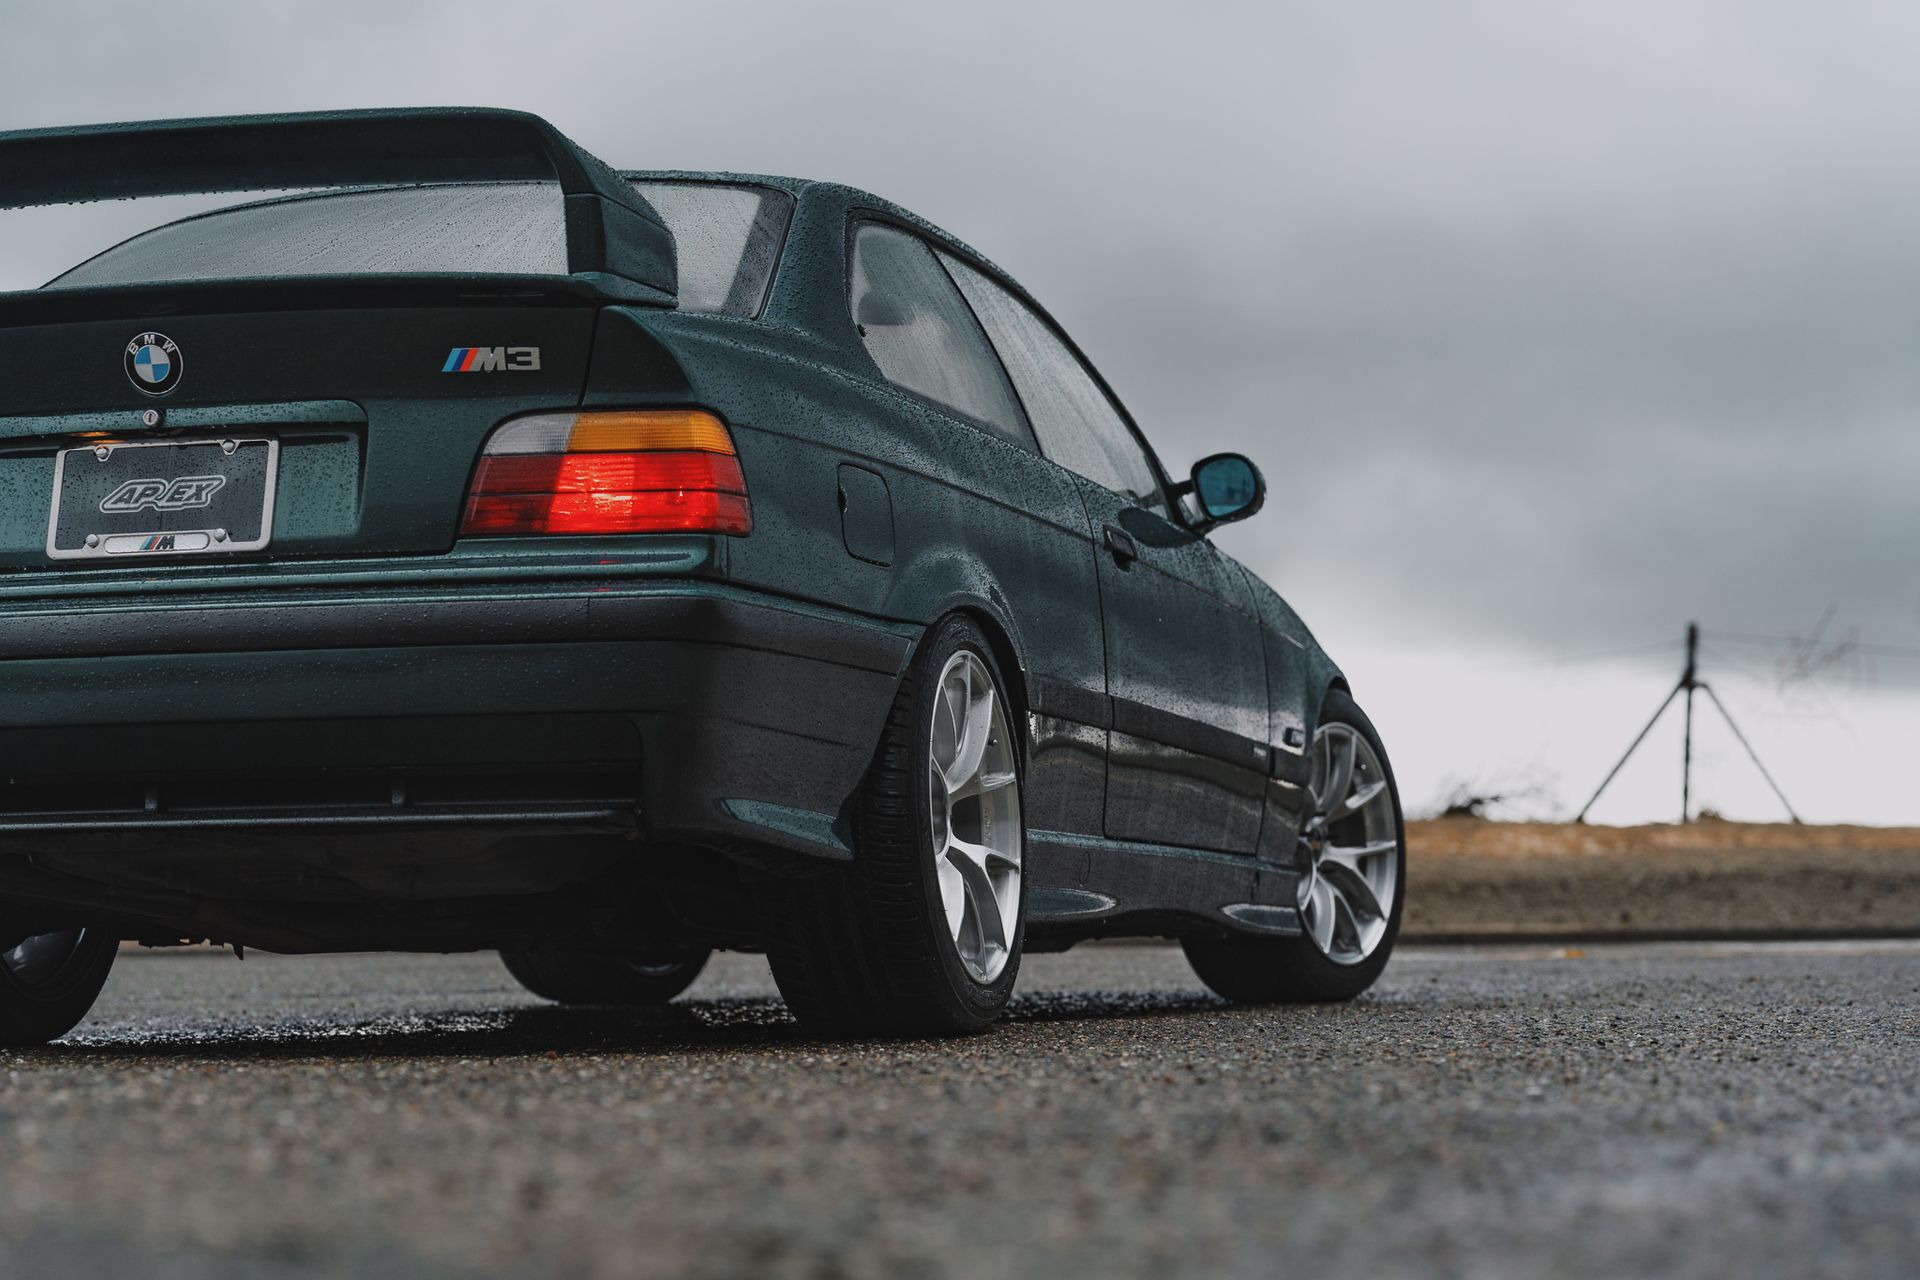 BMW E36 M3 with 17" VS-5RS in Brushed Clear